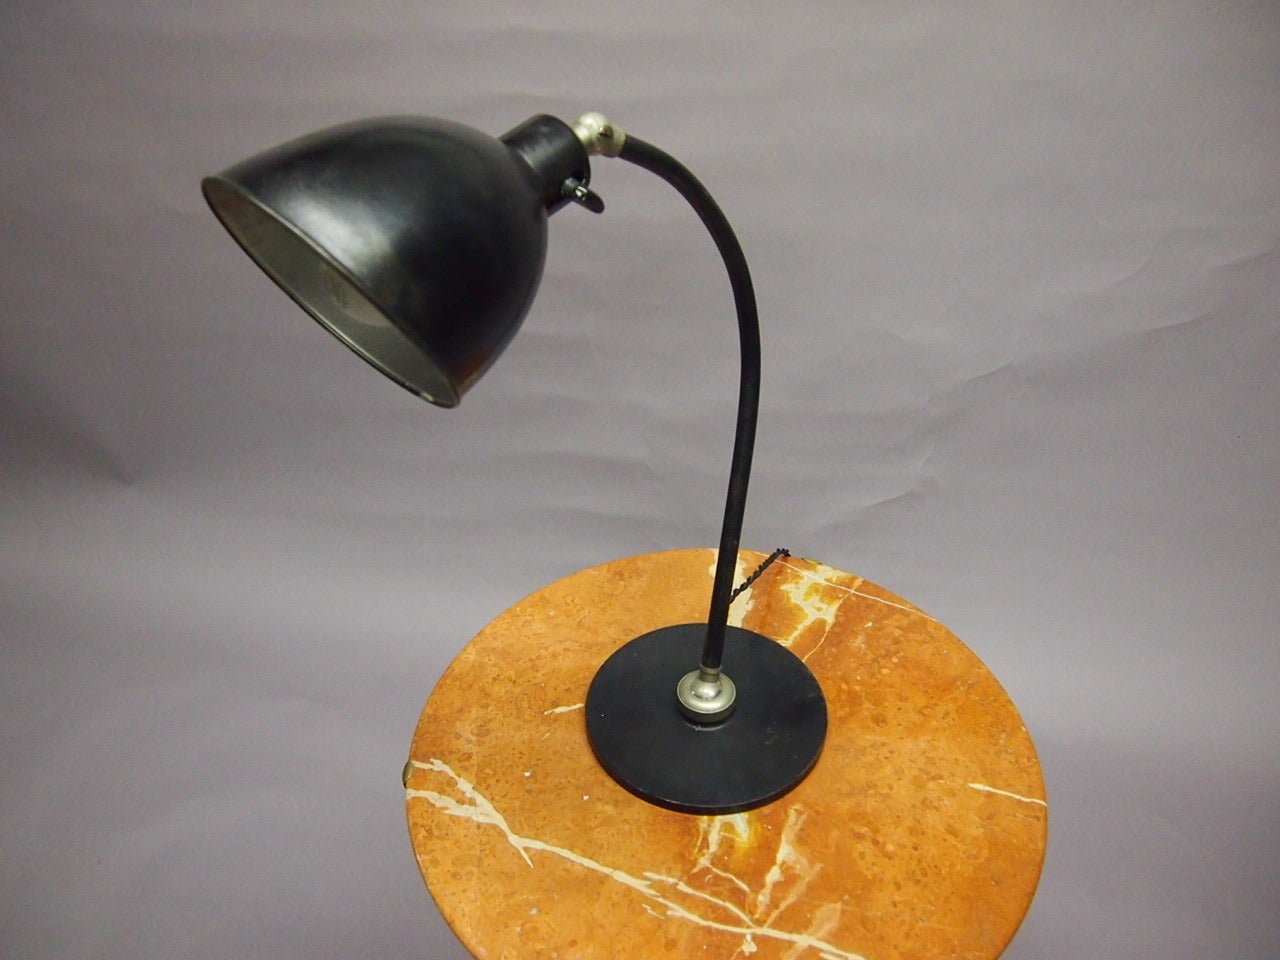 Lamp Named "Polo Popular" Designed by Christian Dell in 1931, Bauhaus